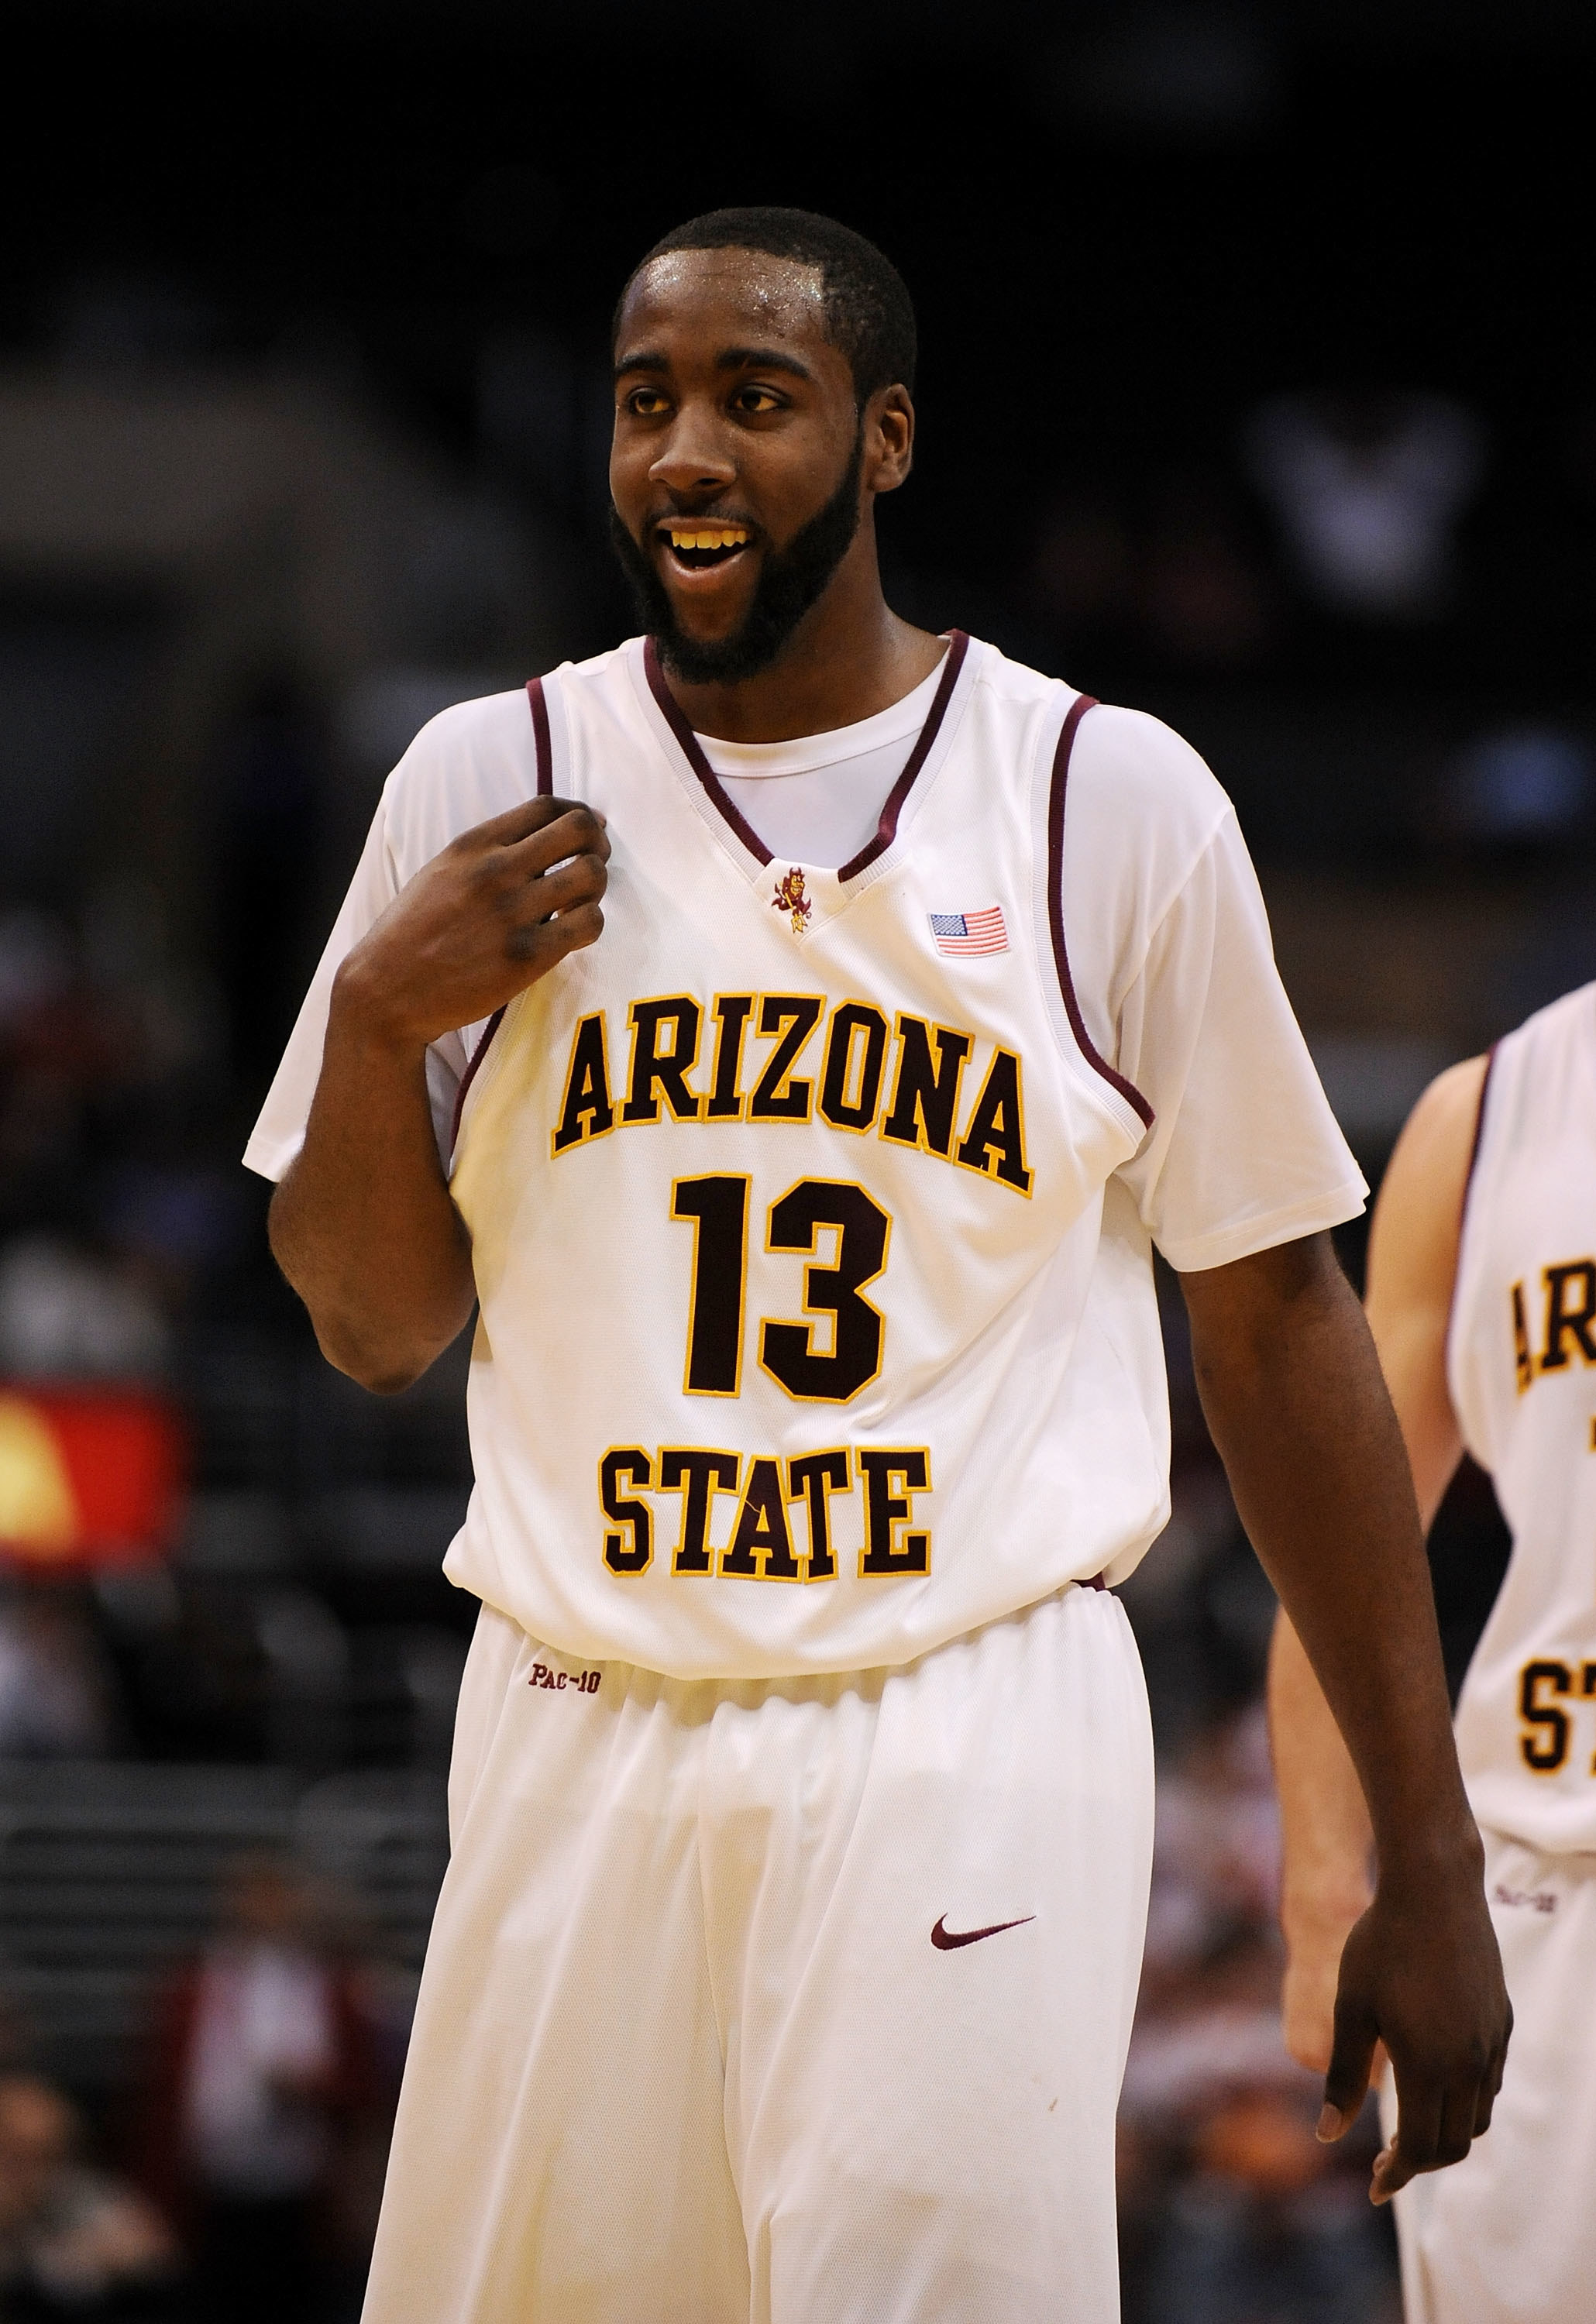 Young James Harden in Arizona State uniform.